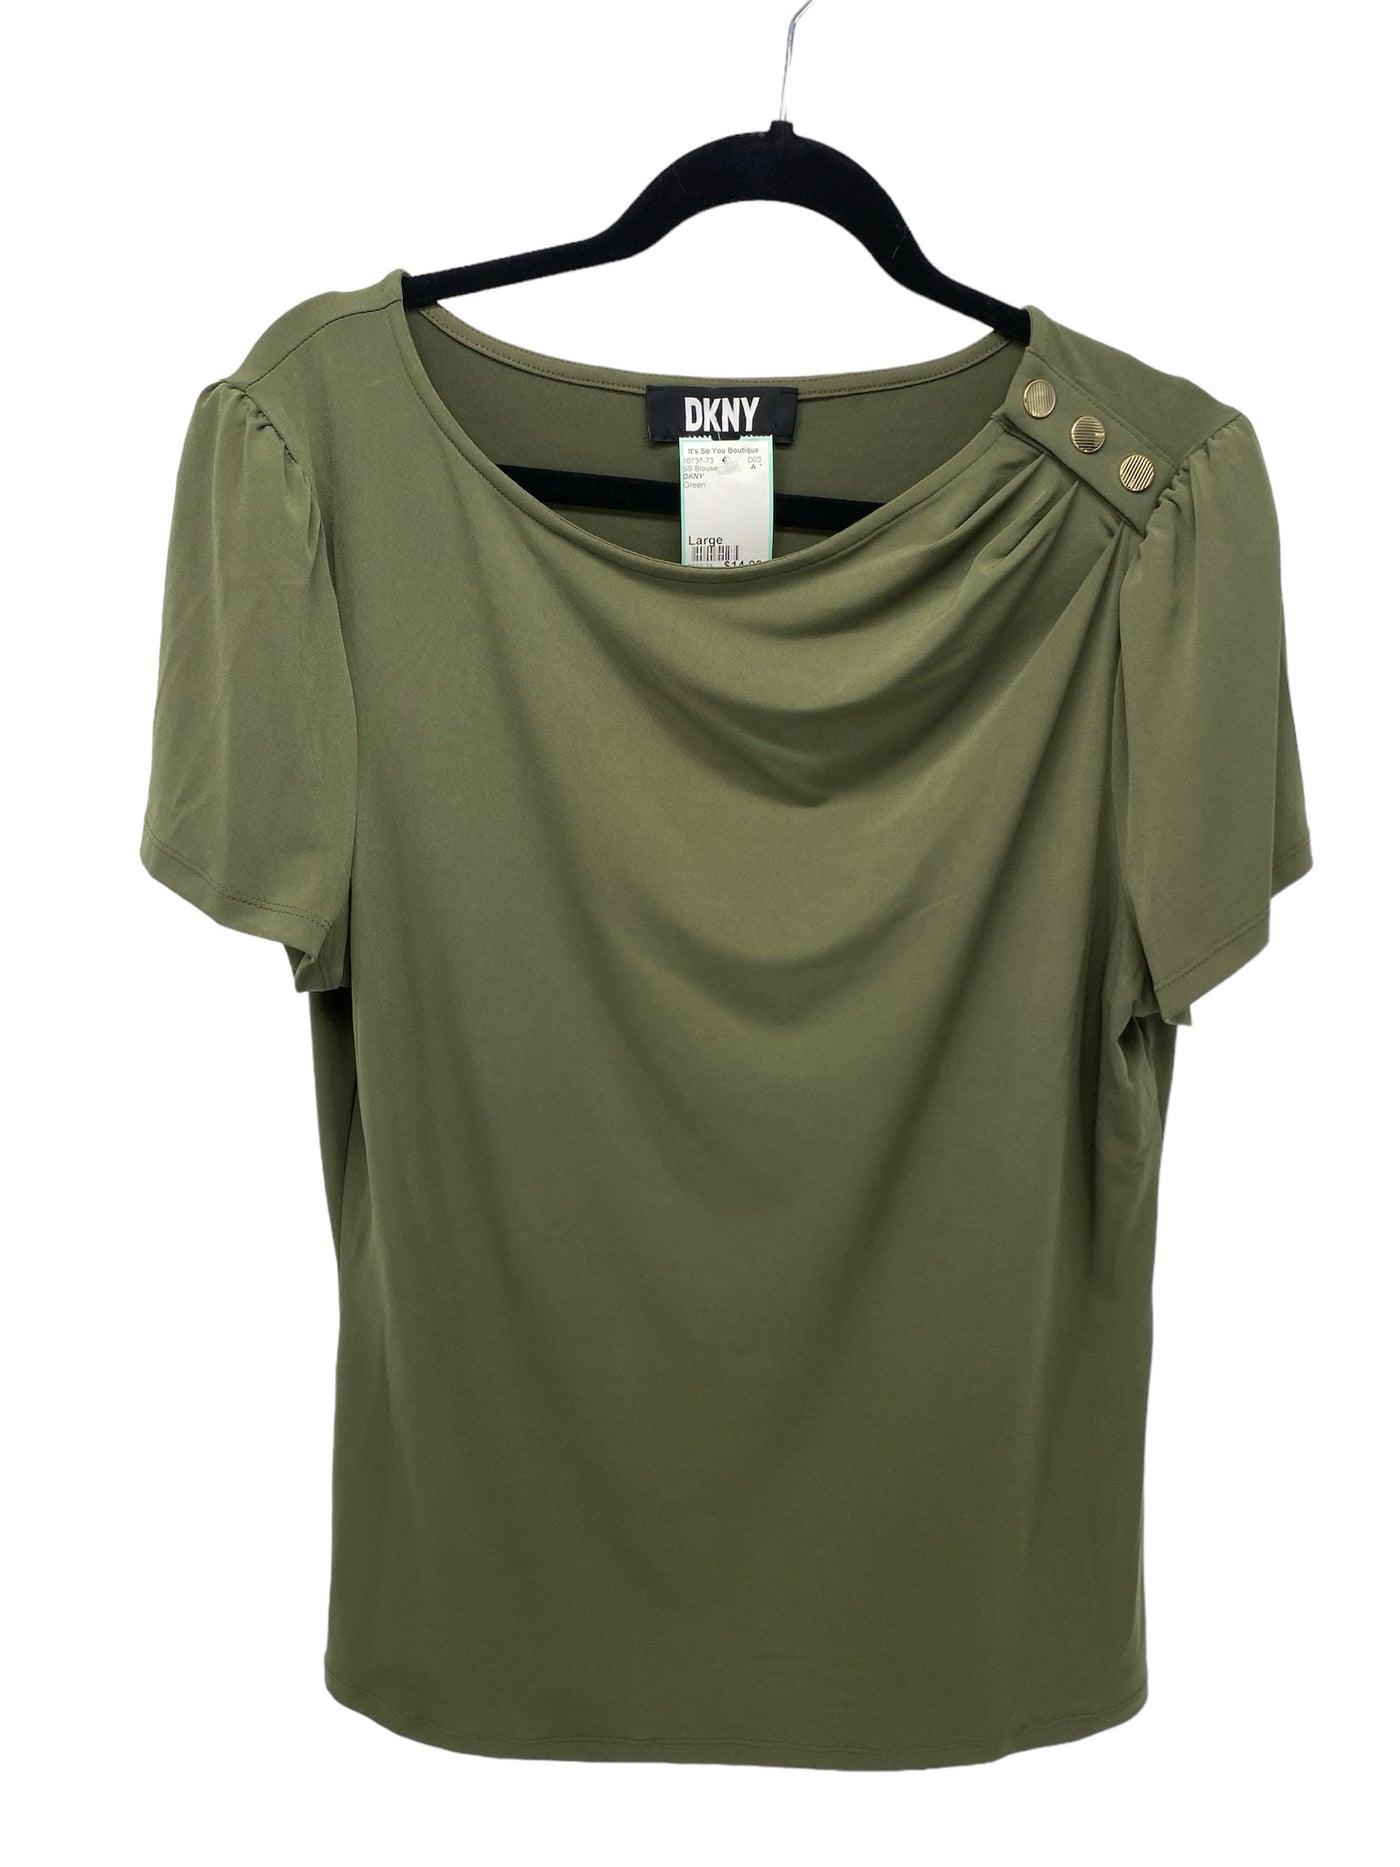 DKNY Misses Size Large Green SS Blouse